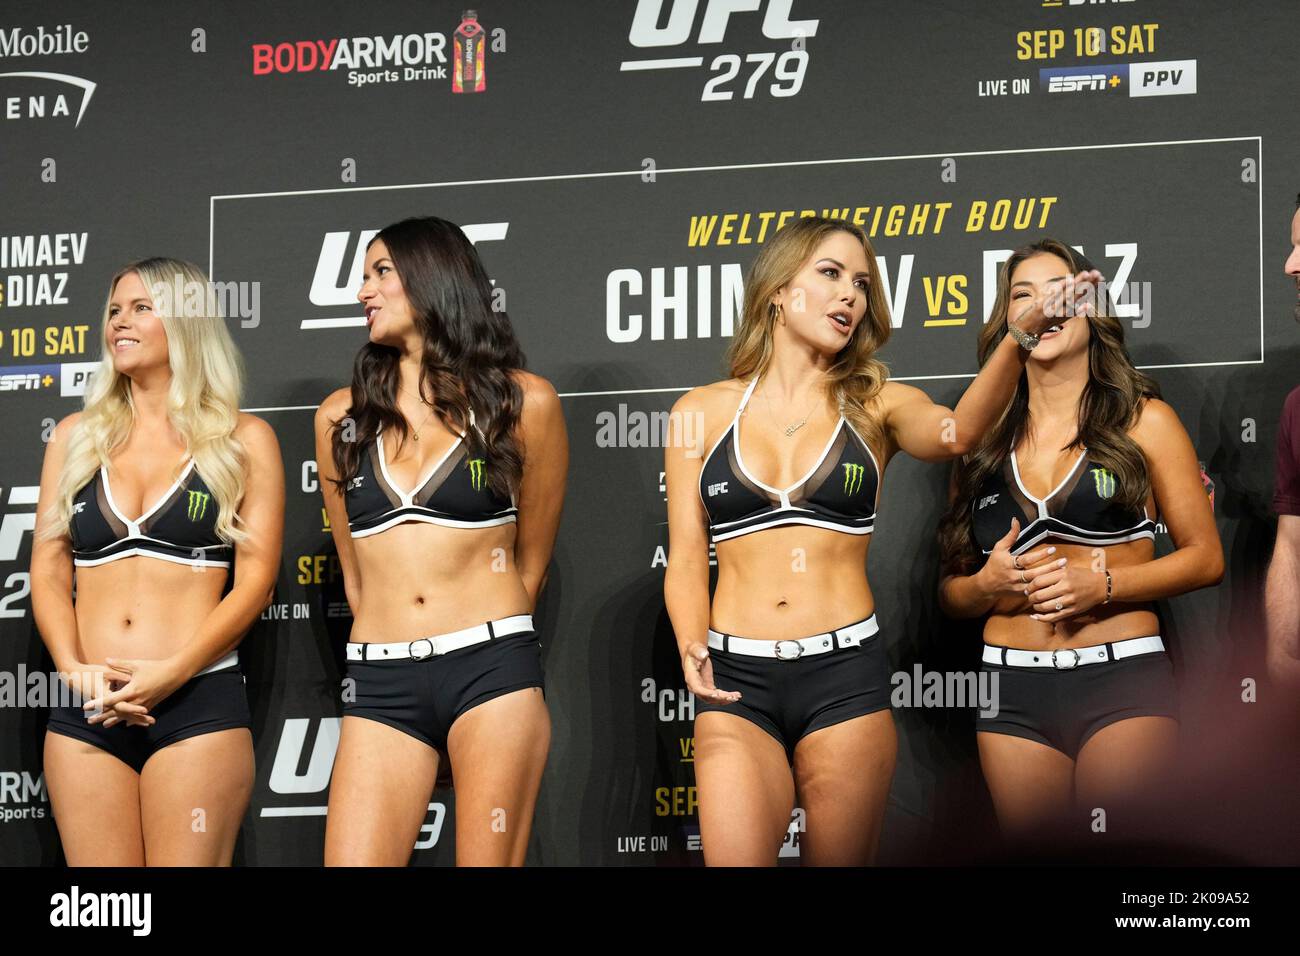 LAS VEGAS, NV - 9 settembre: The UFC279 Ring Girls at MGM Grand Garden Arena for UFC 279 - Chimaev vs Diaz - Ceremonial Weigh-in on 9 settembre 2022 a Las Vegas, NV, Stati Uniti. (Foto di Louis Grasse/PxImages) Foto Stock